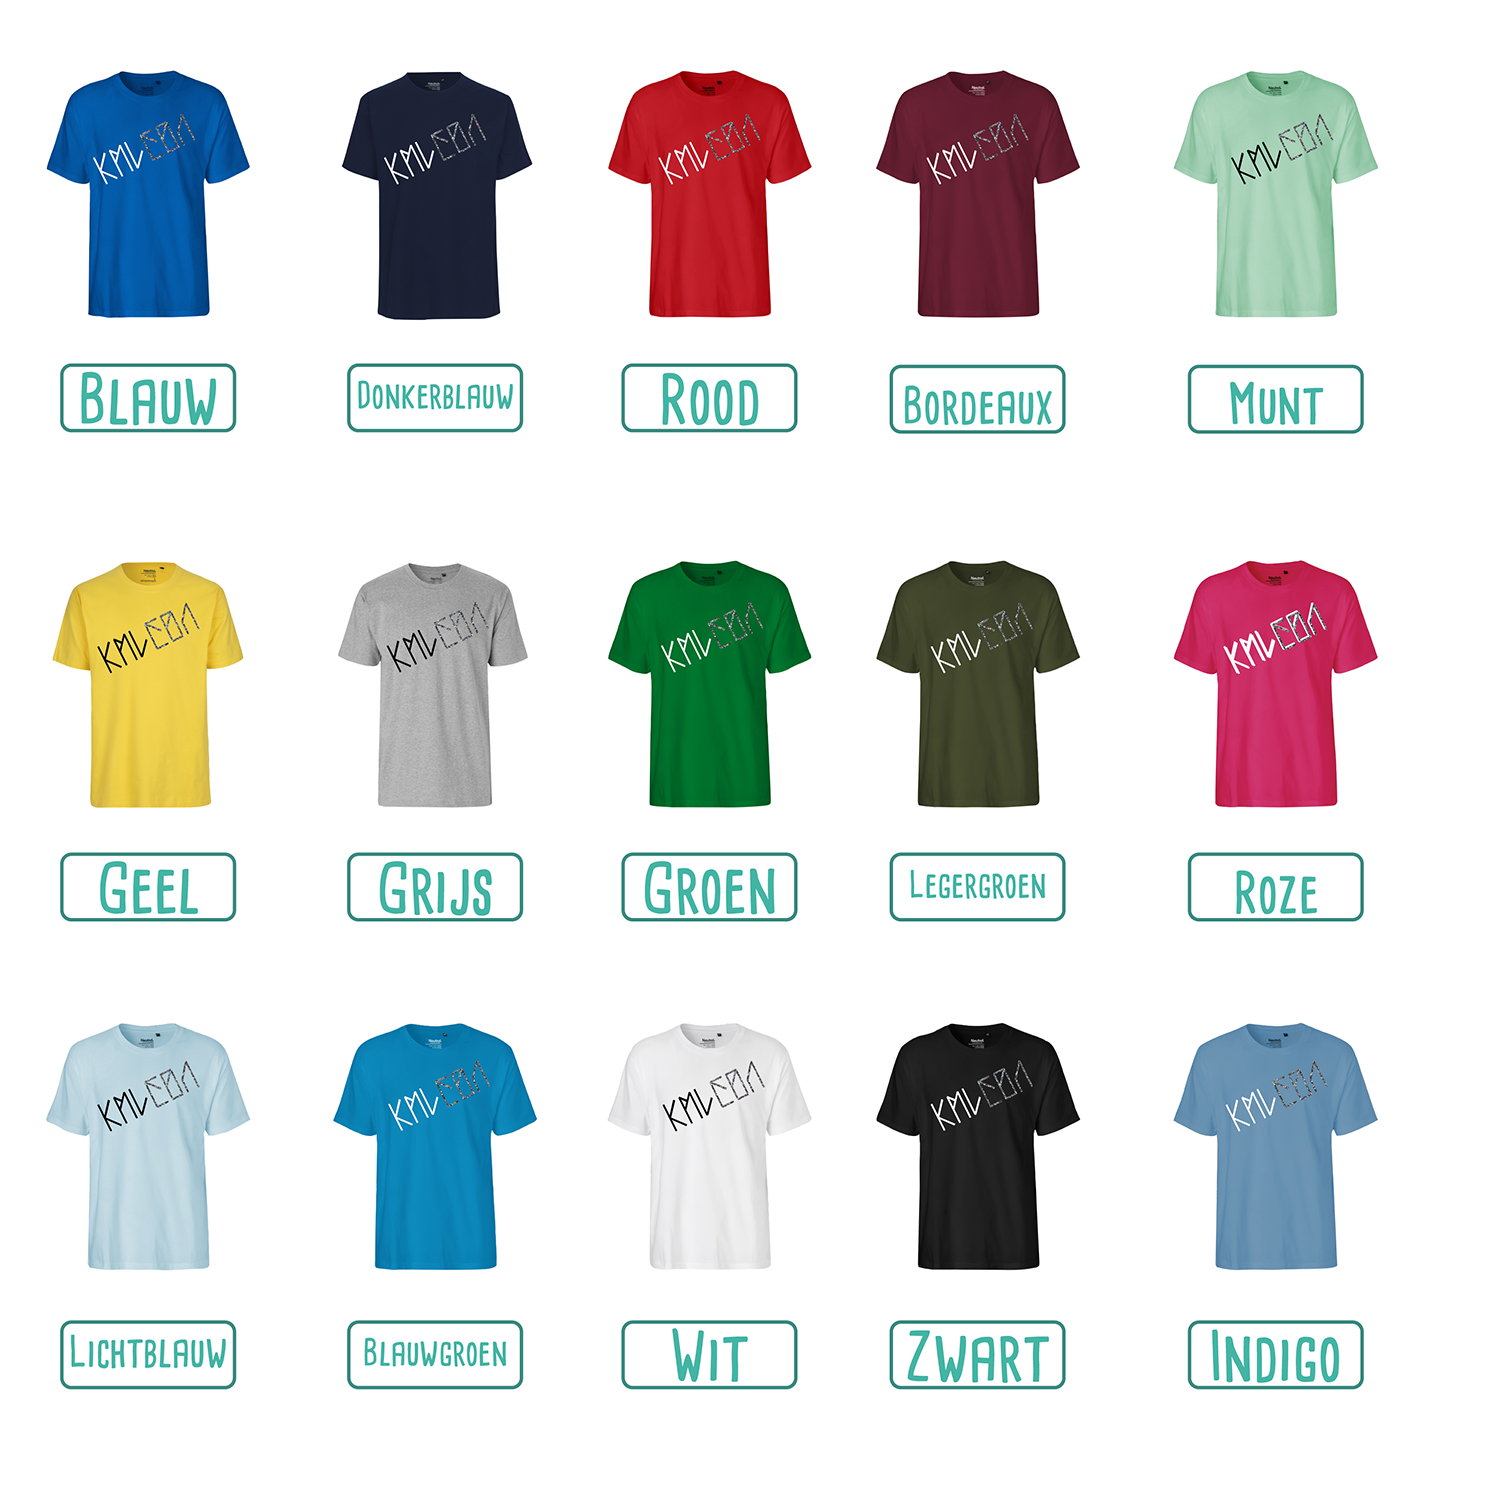 Colour options for adult shirts with short sleeves by KMLeon.